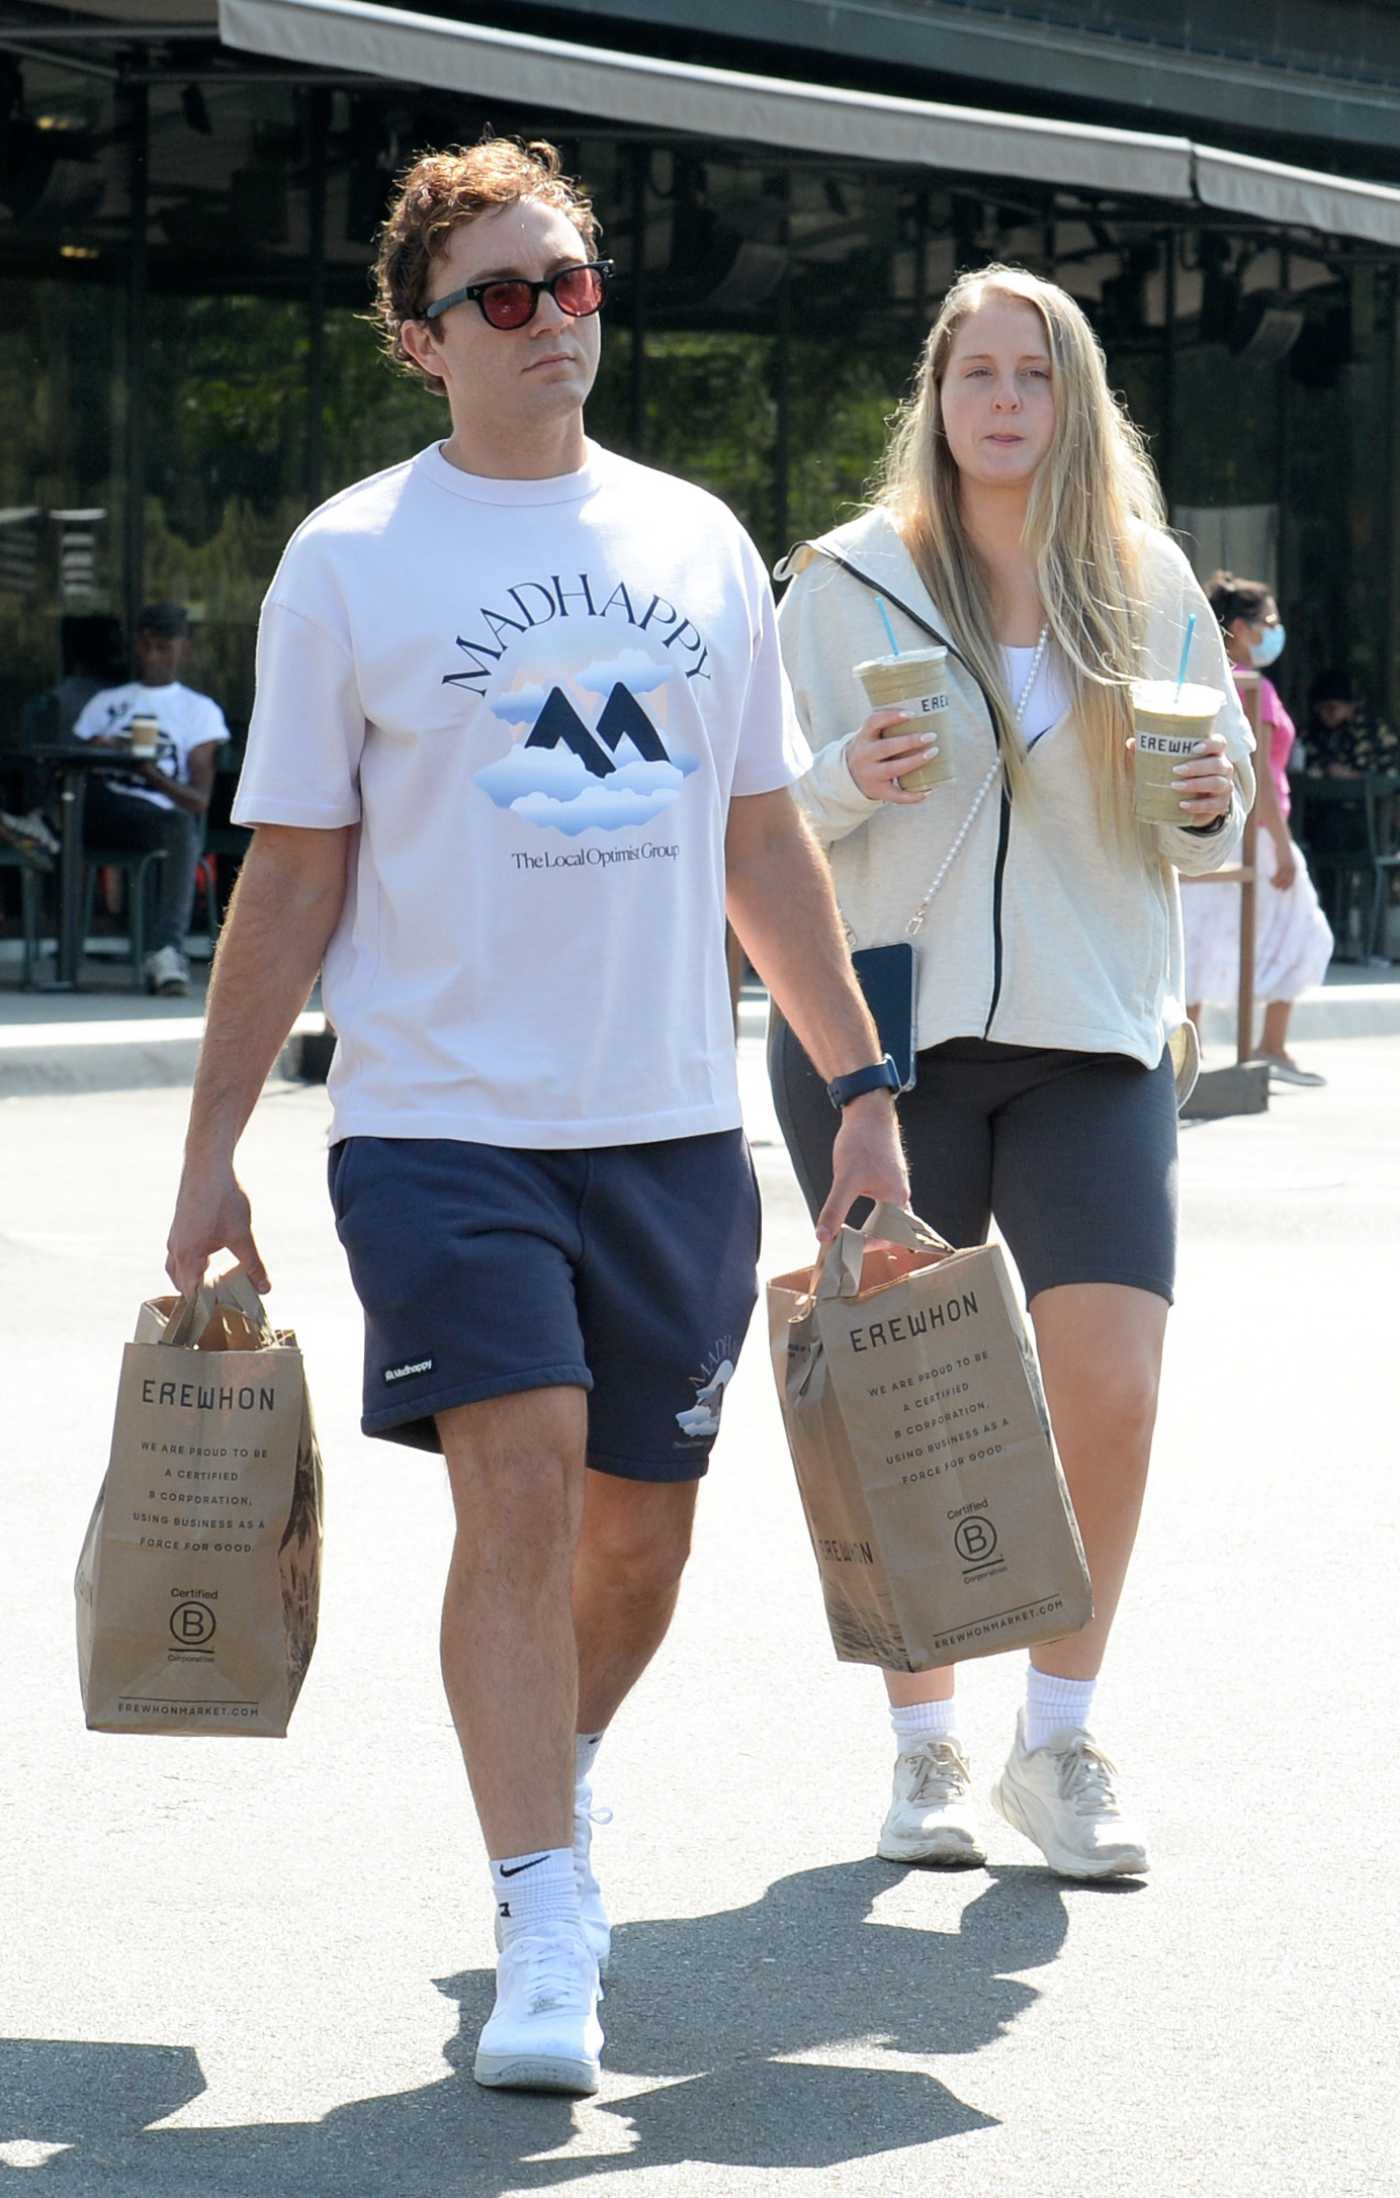 Meghan Trainor in a Black Spandex Shorts Goes Grocery Shopping with Daryl Sabara at Erewhon in Los Angeles 08/04/2022